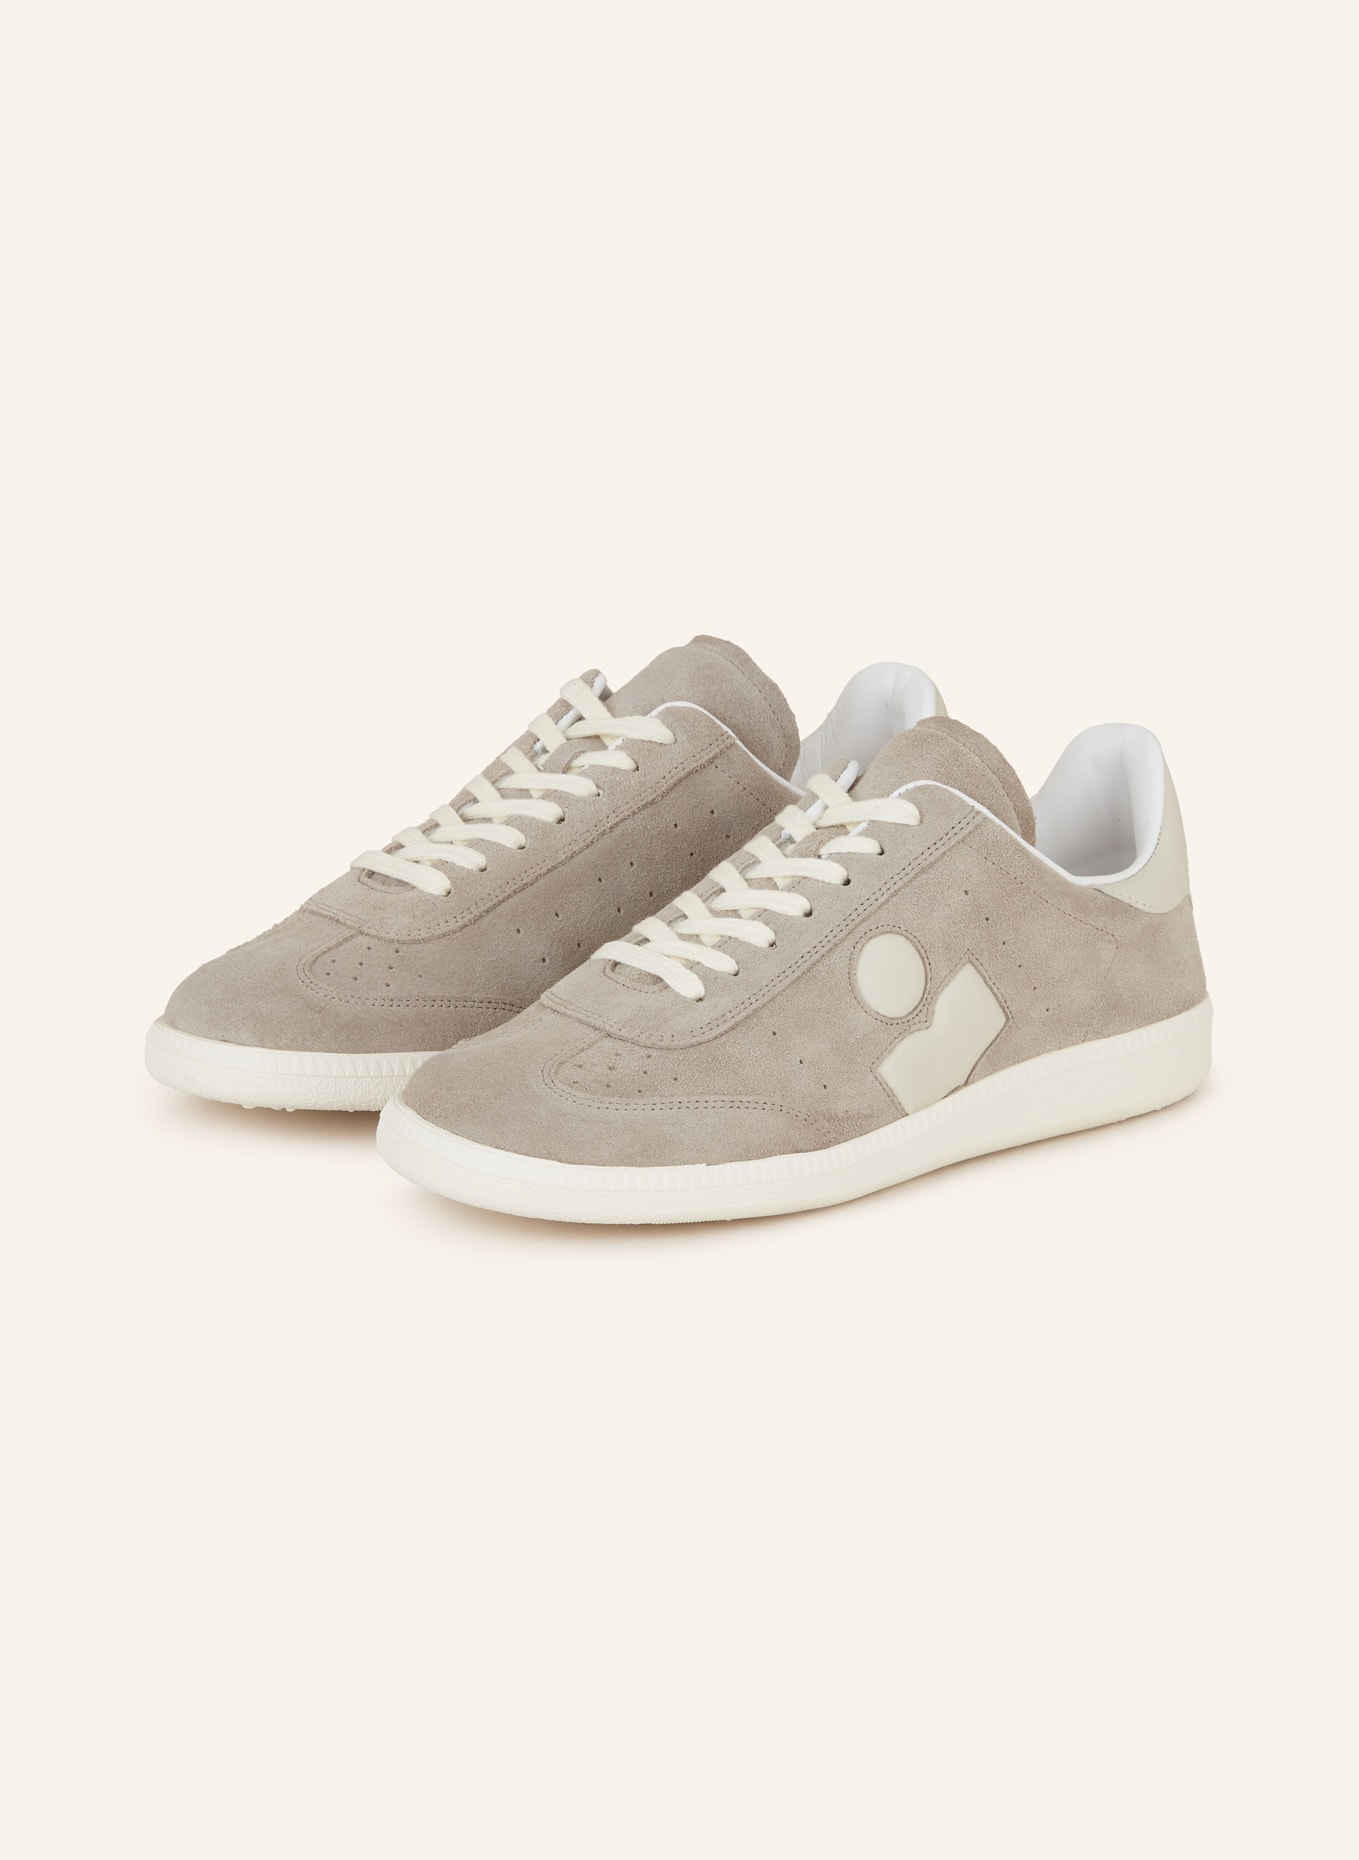 ISABEL MARANT Sneaker BRYCE, Farbe: TAUPE (Bild 1)